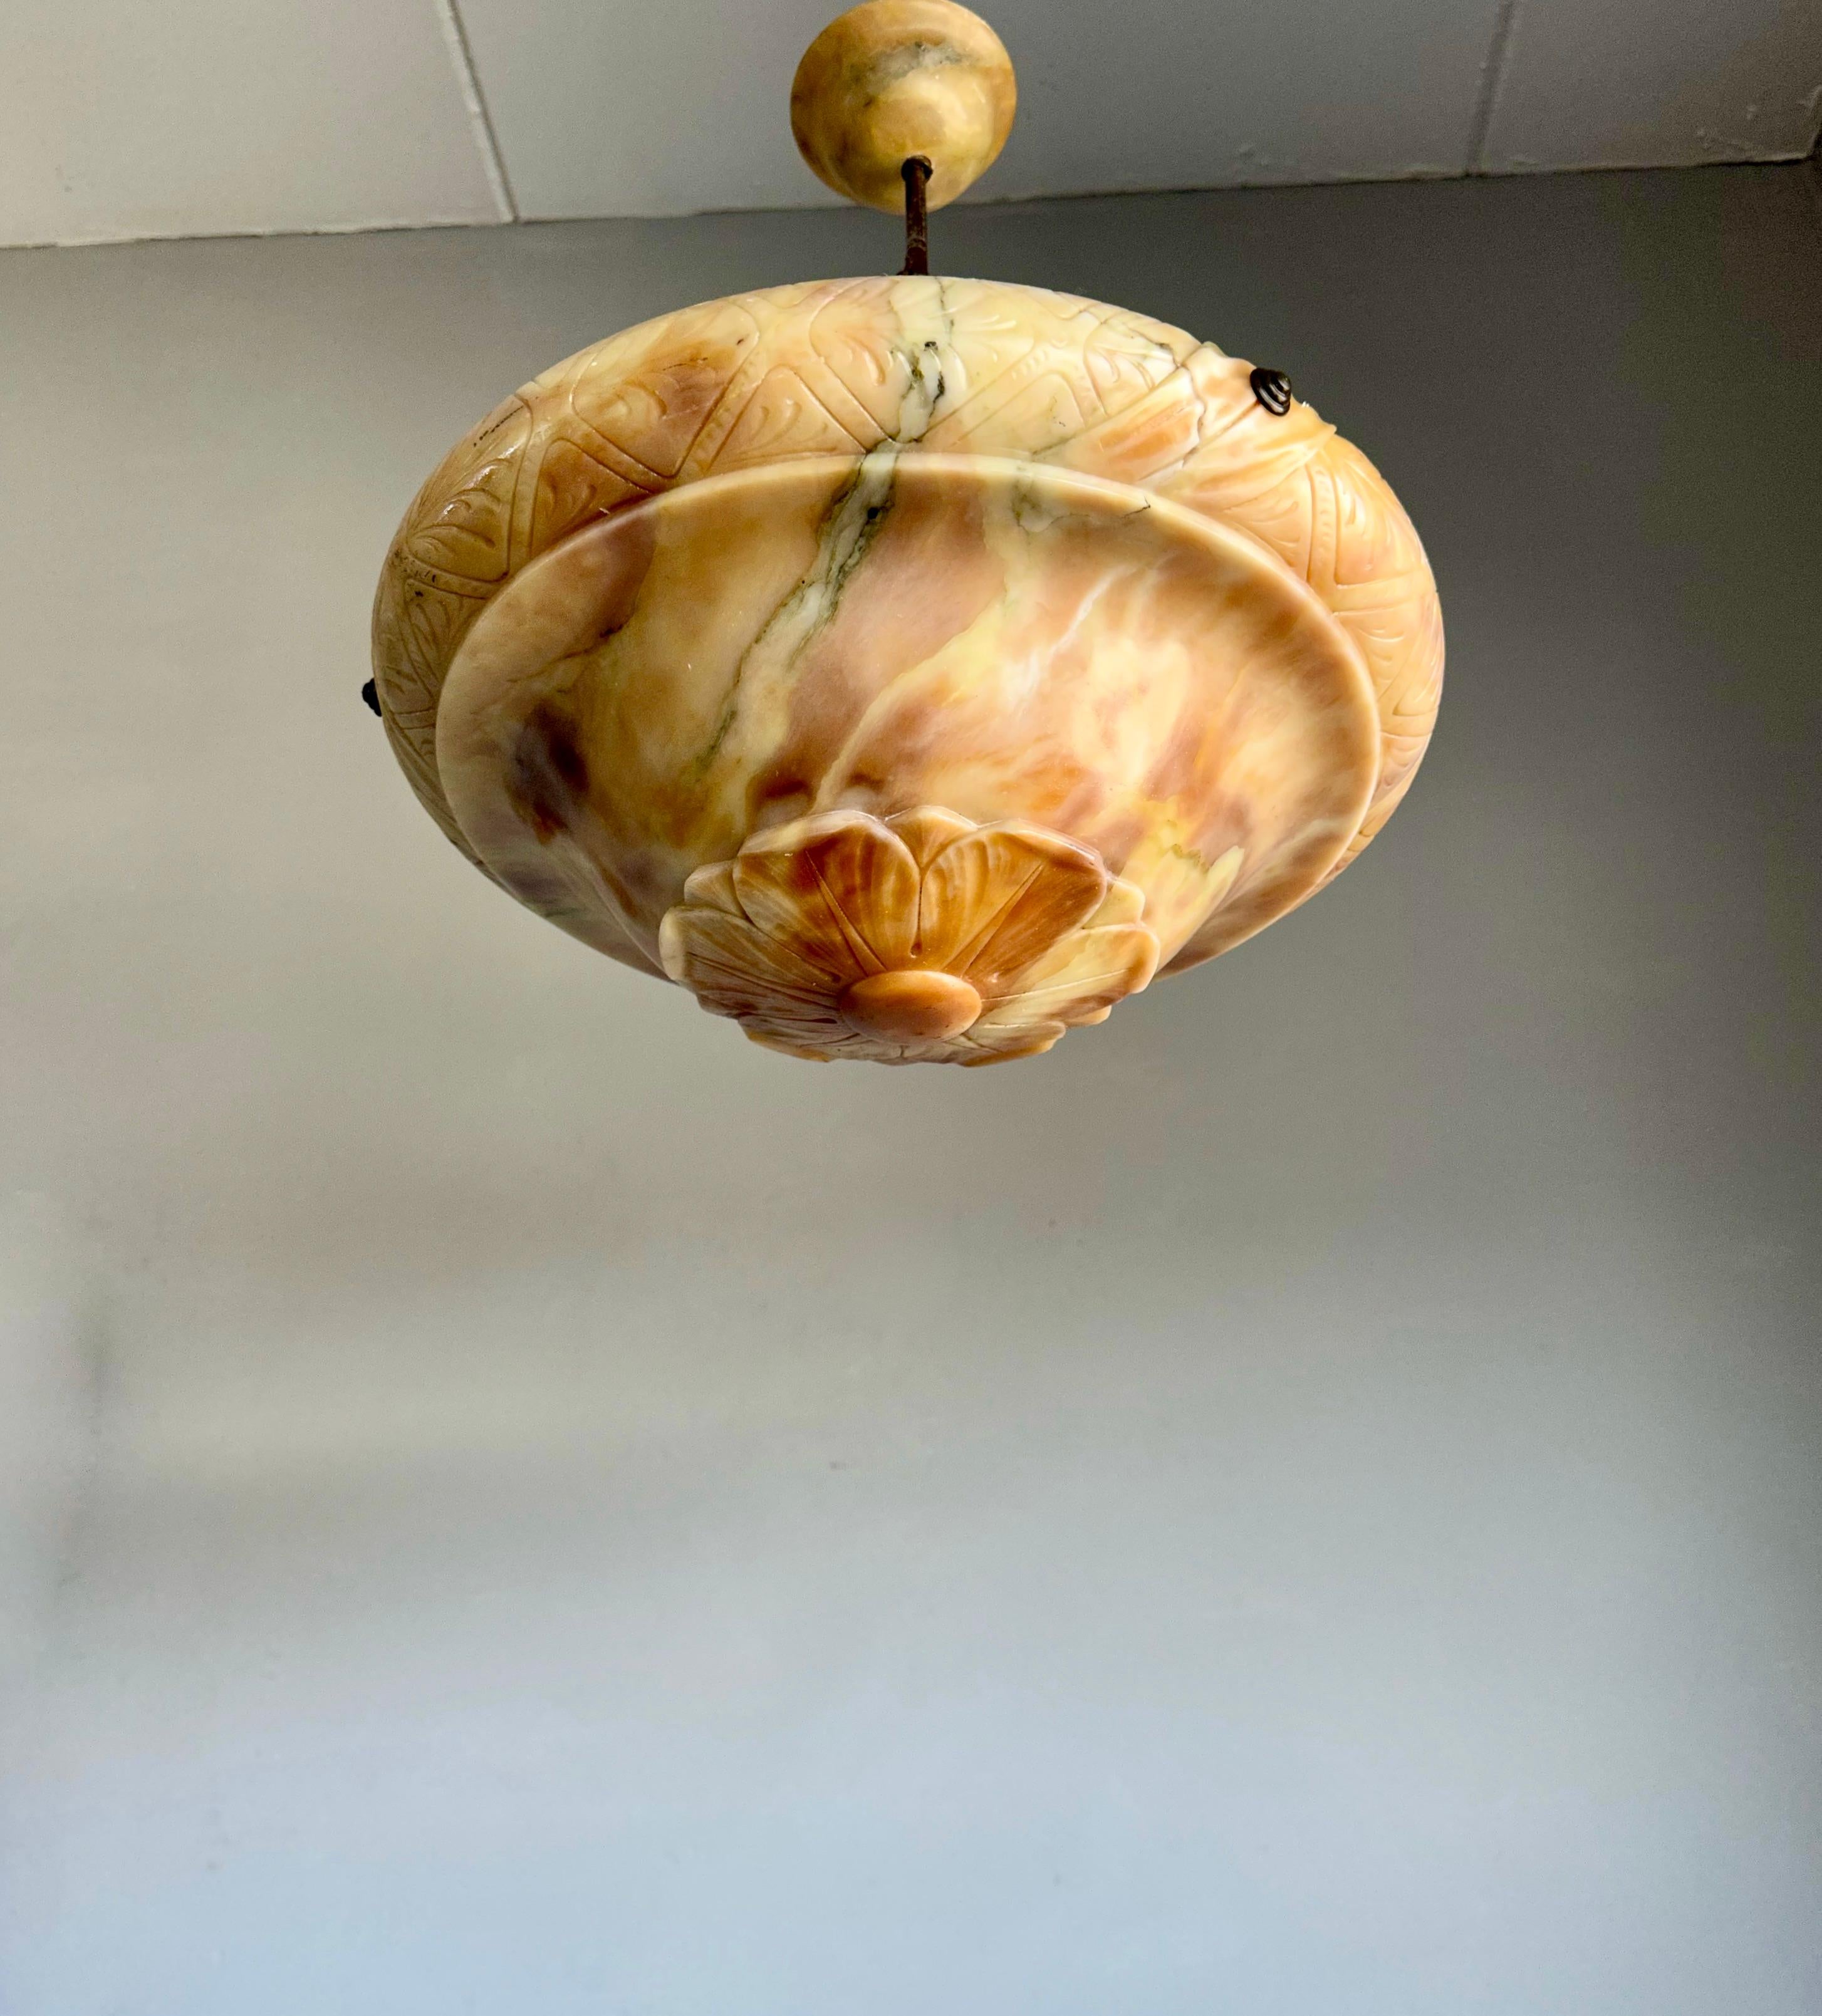 One of a kind and perfectly balanced light fixture with a top class alabaster shade.

Thanks to its beautiful design and its truly excellent condition this perfectly balanced alabaster chandelier will bring class and a great atmosphere, both in